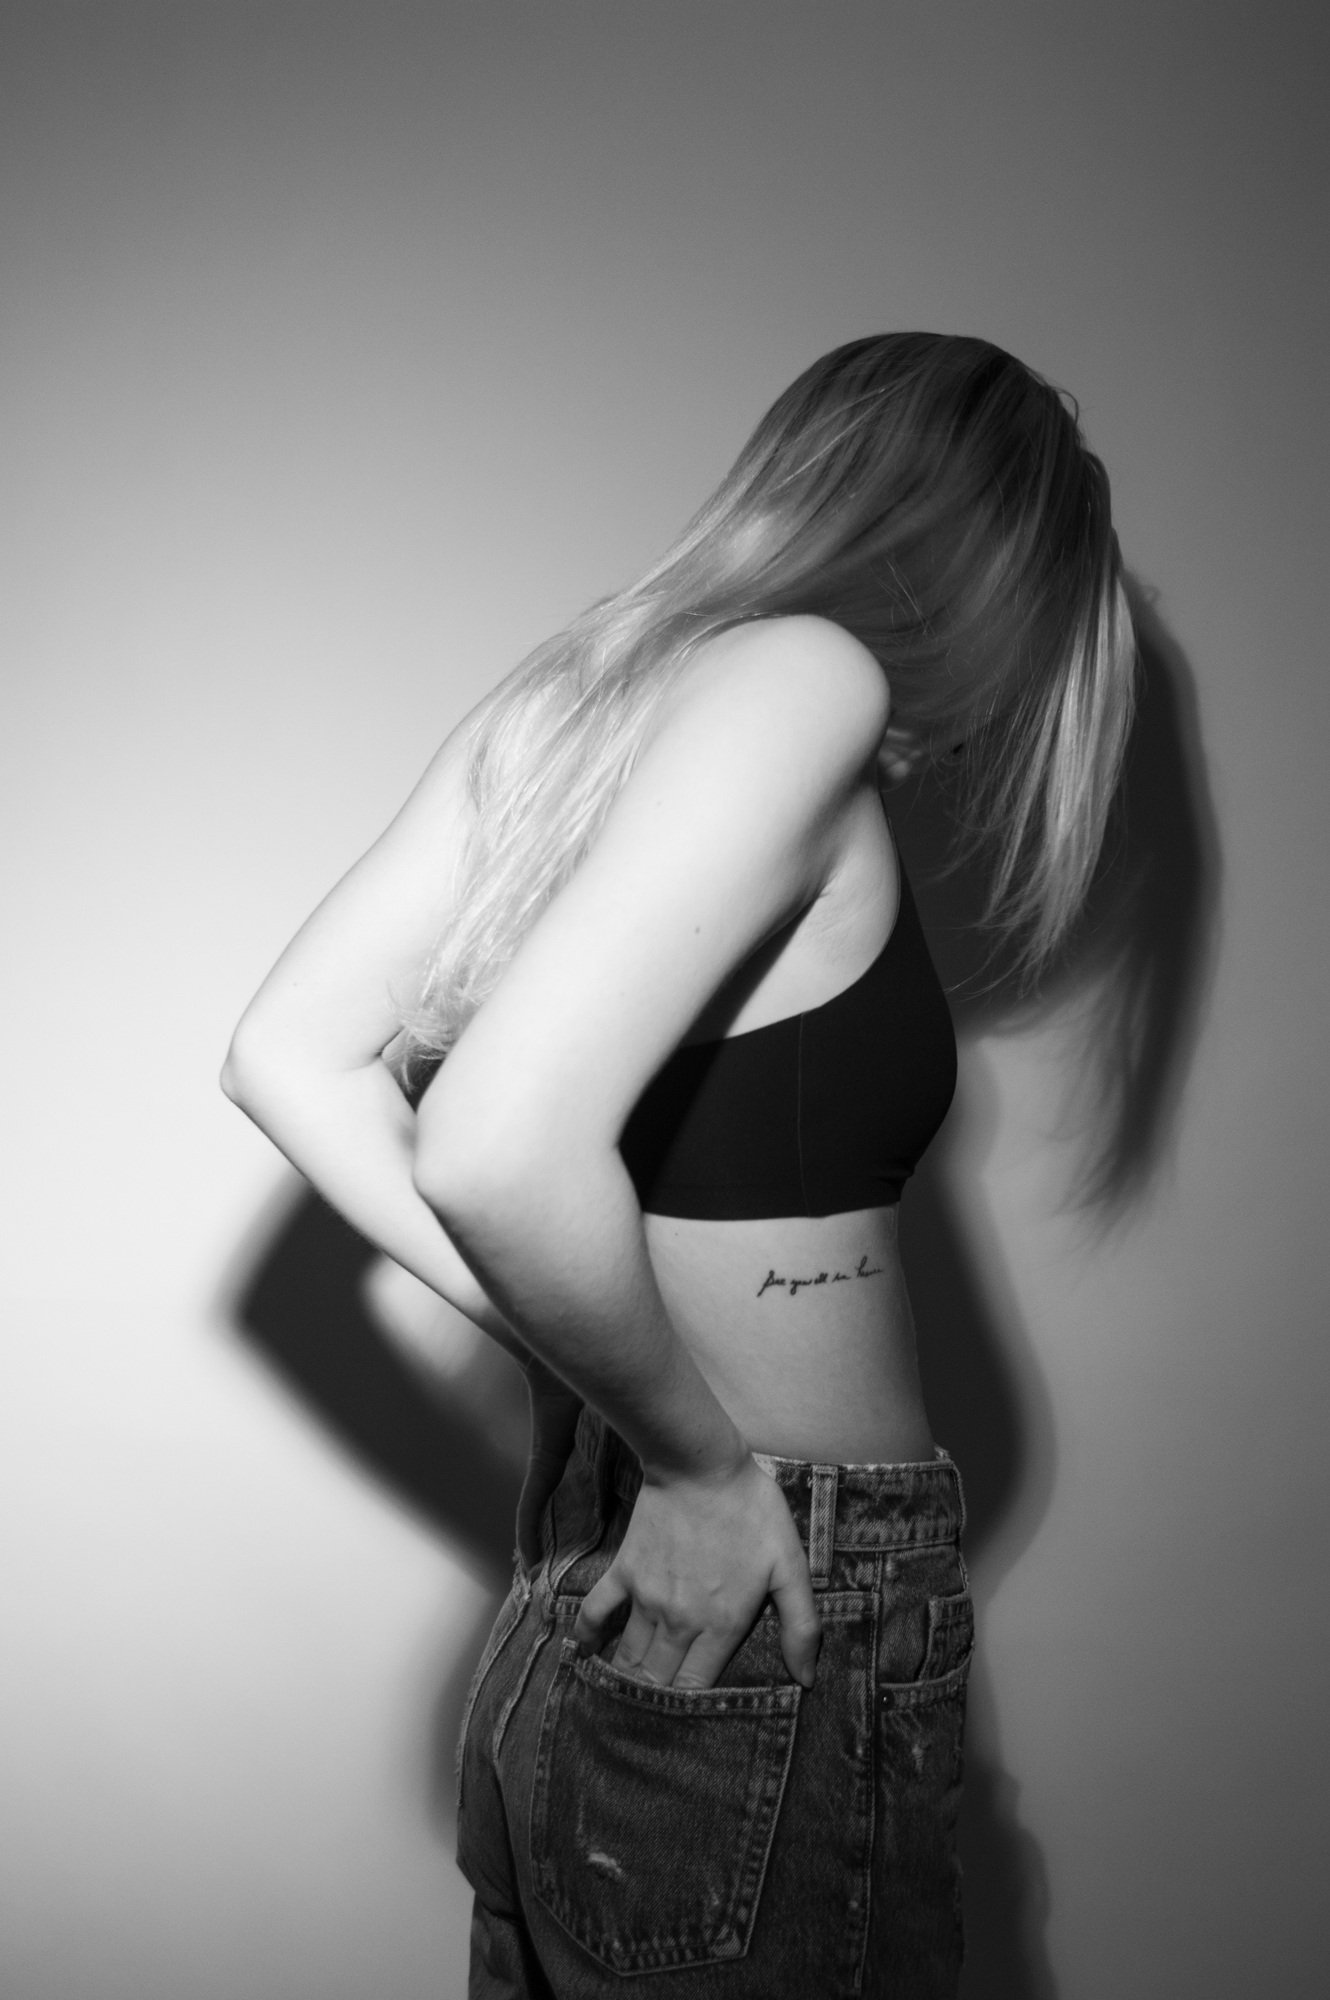 Black and white image of the back of a slender blond female's head, so her hair is visible falling off of her shoulder. Small scripted tattoo visible on her side.